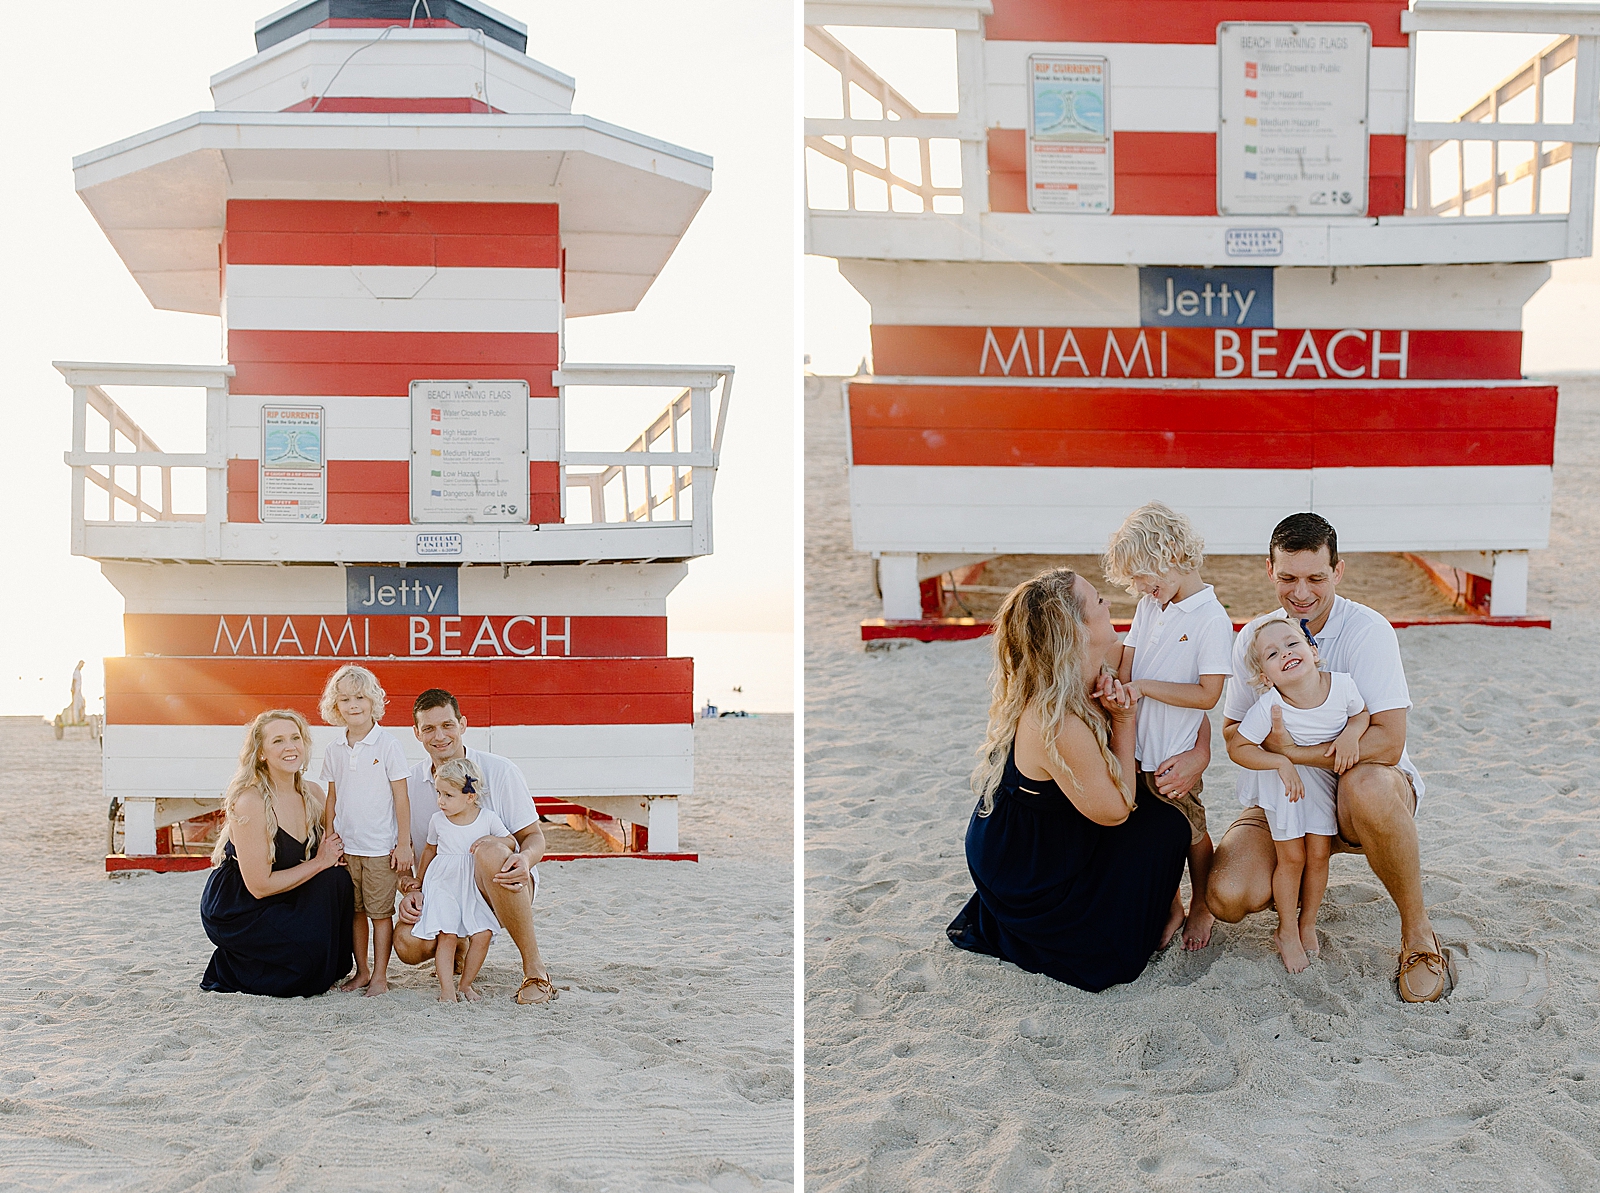 Husband and wife crouching down with kids in front of red striped Lifeguard station